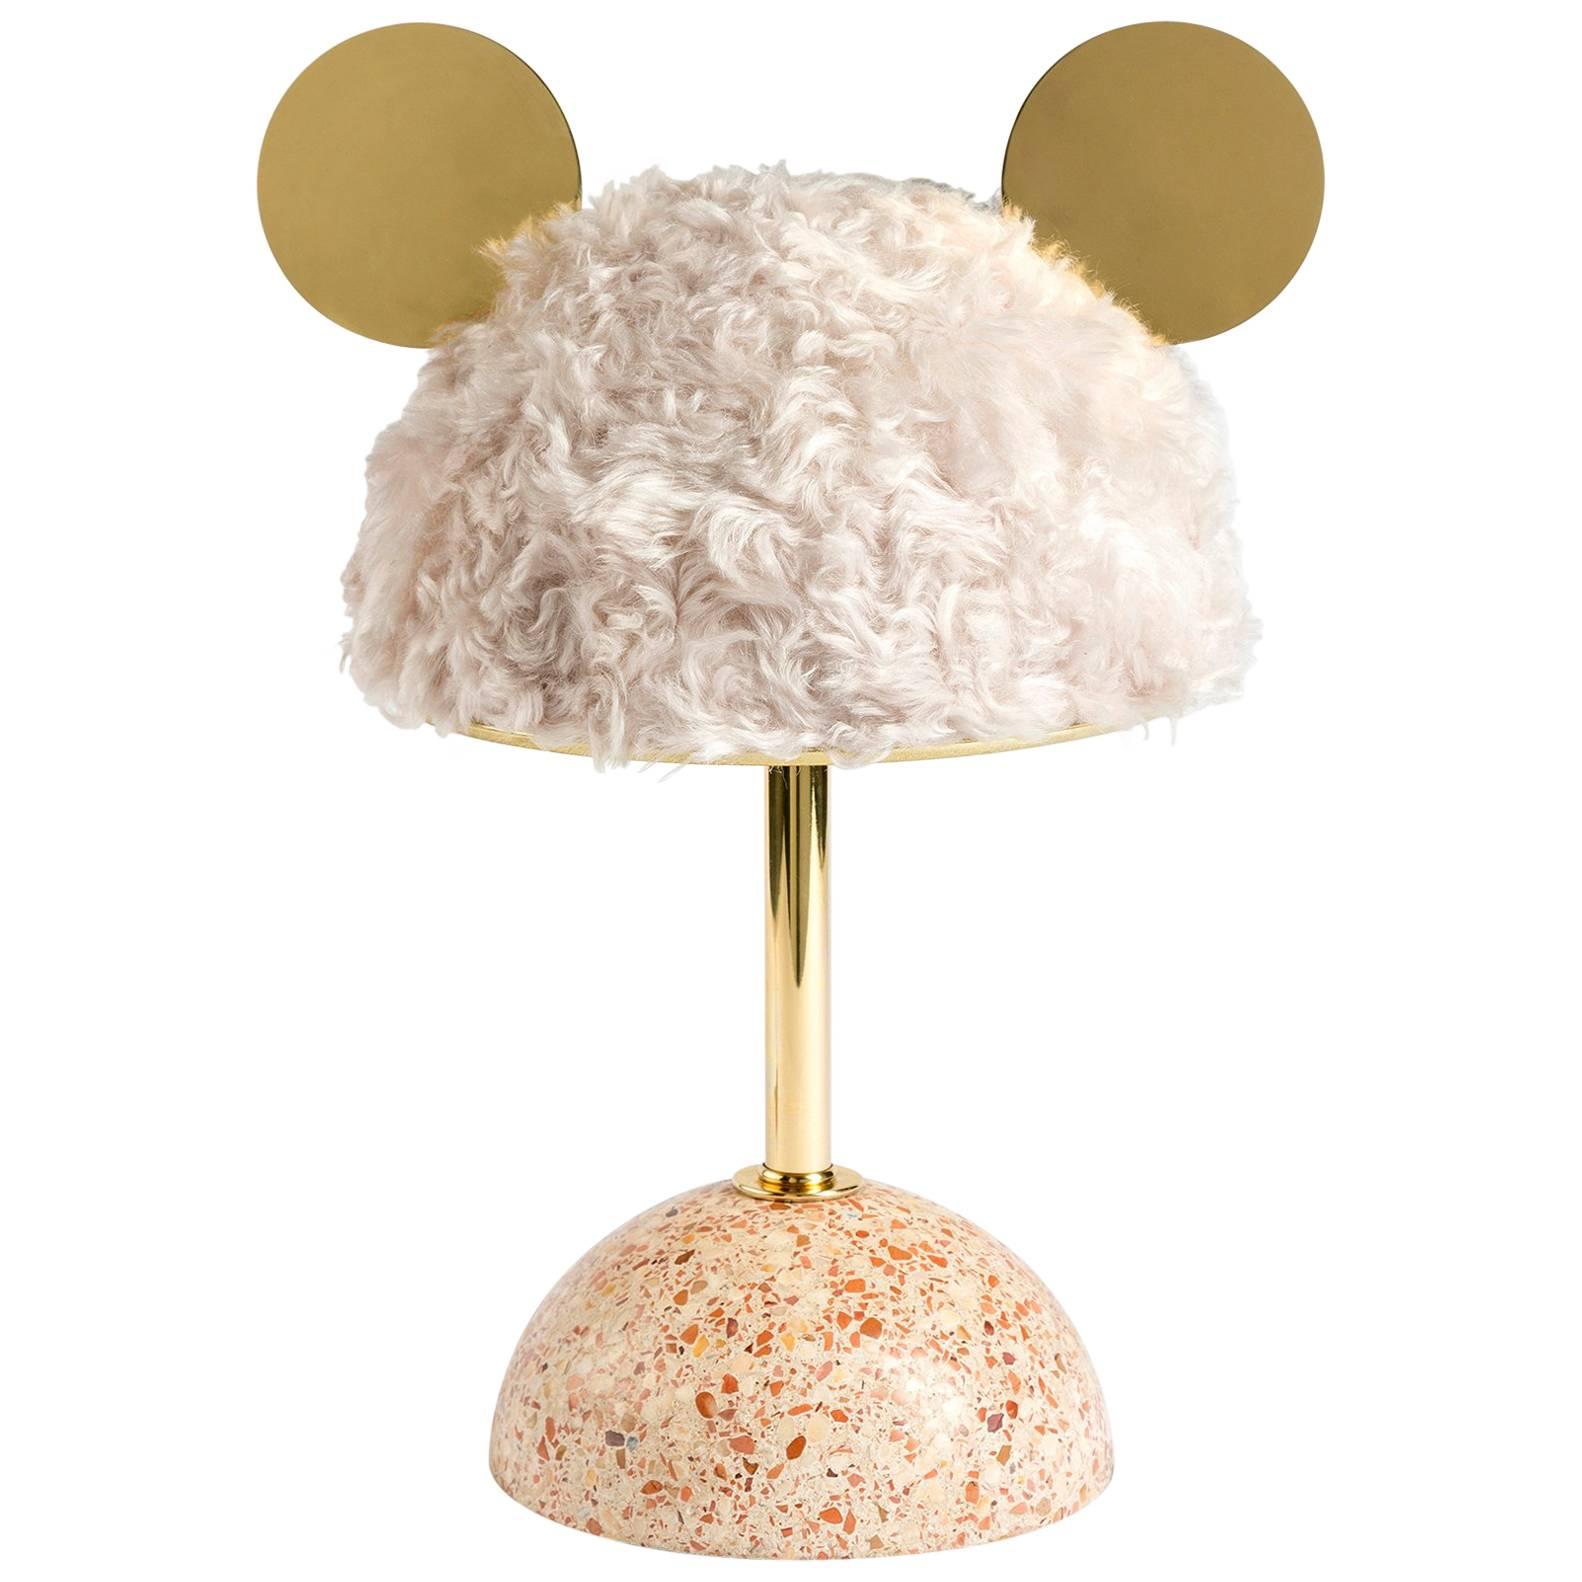 21st Century Minos Table Lamp in White Mohair, Terrazzo and Polished Brass For Sale